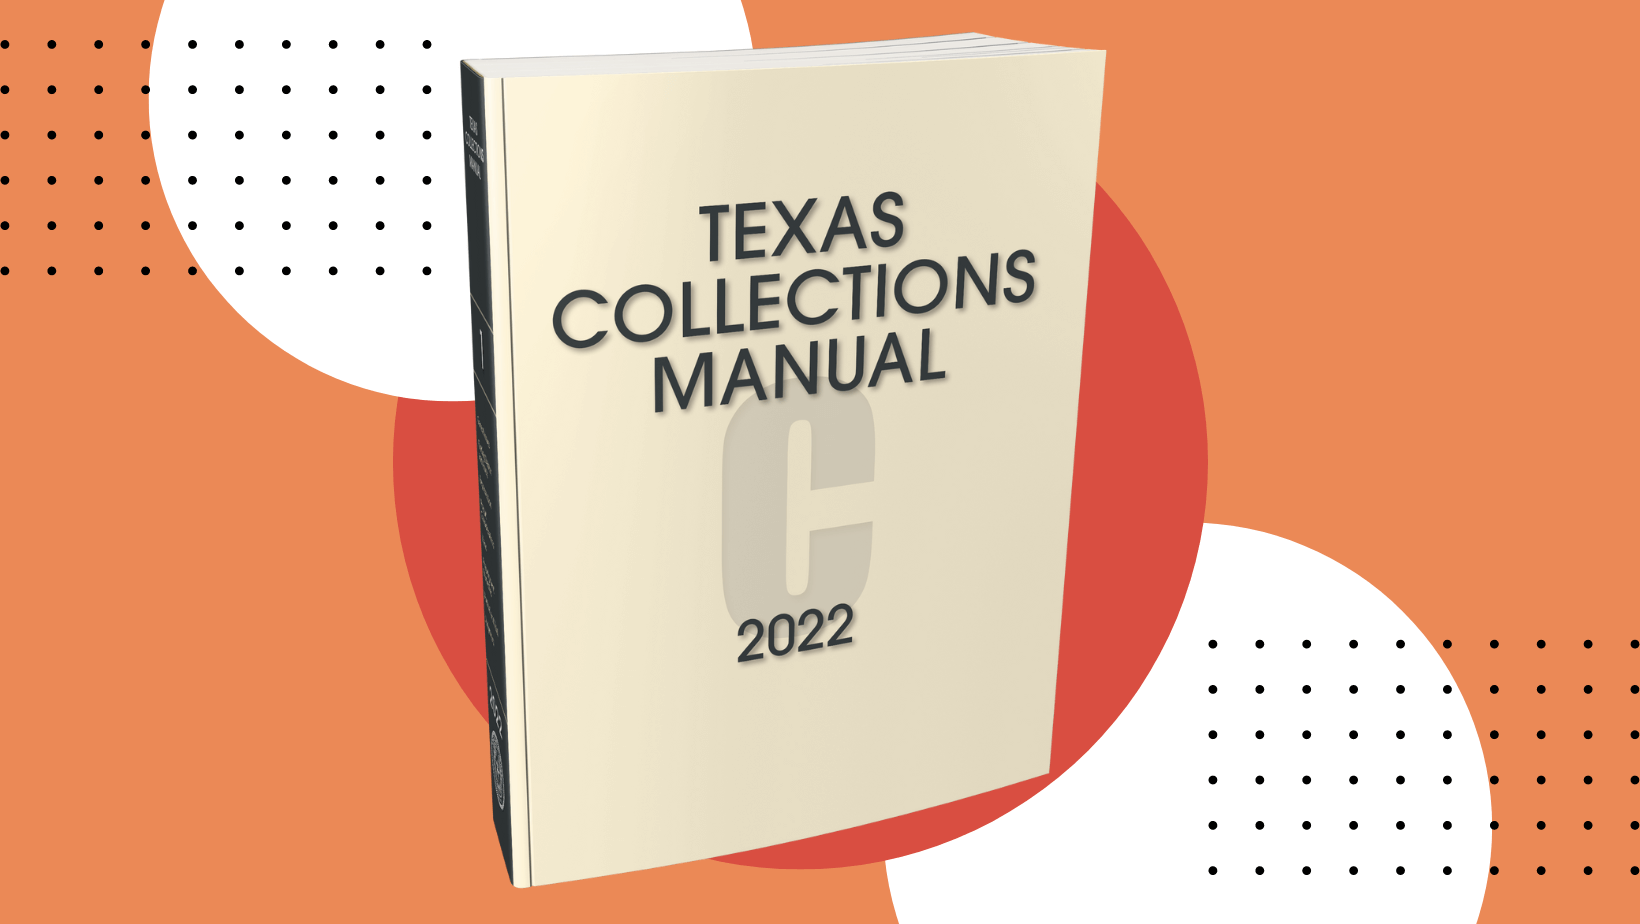 Featured image for “Texas Collections Manual 2022, ed., Is Now Available!”